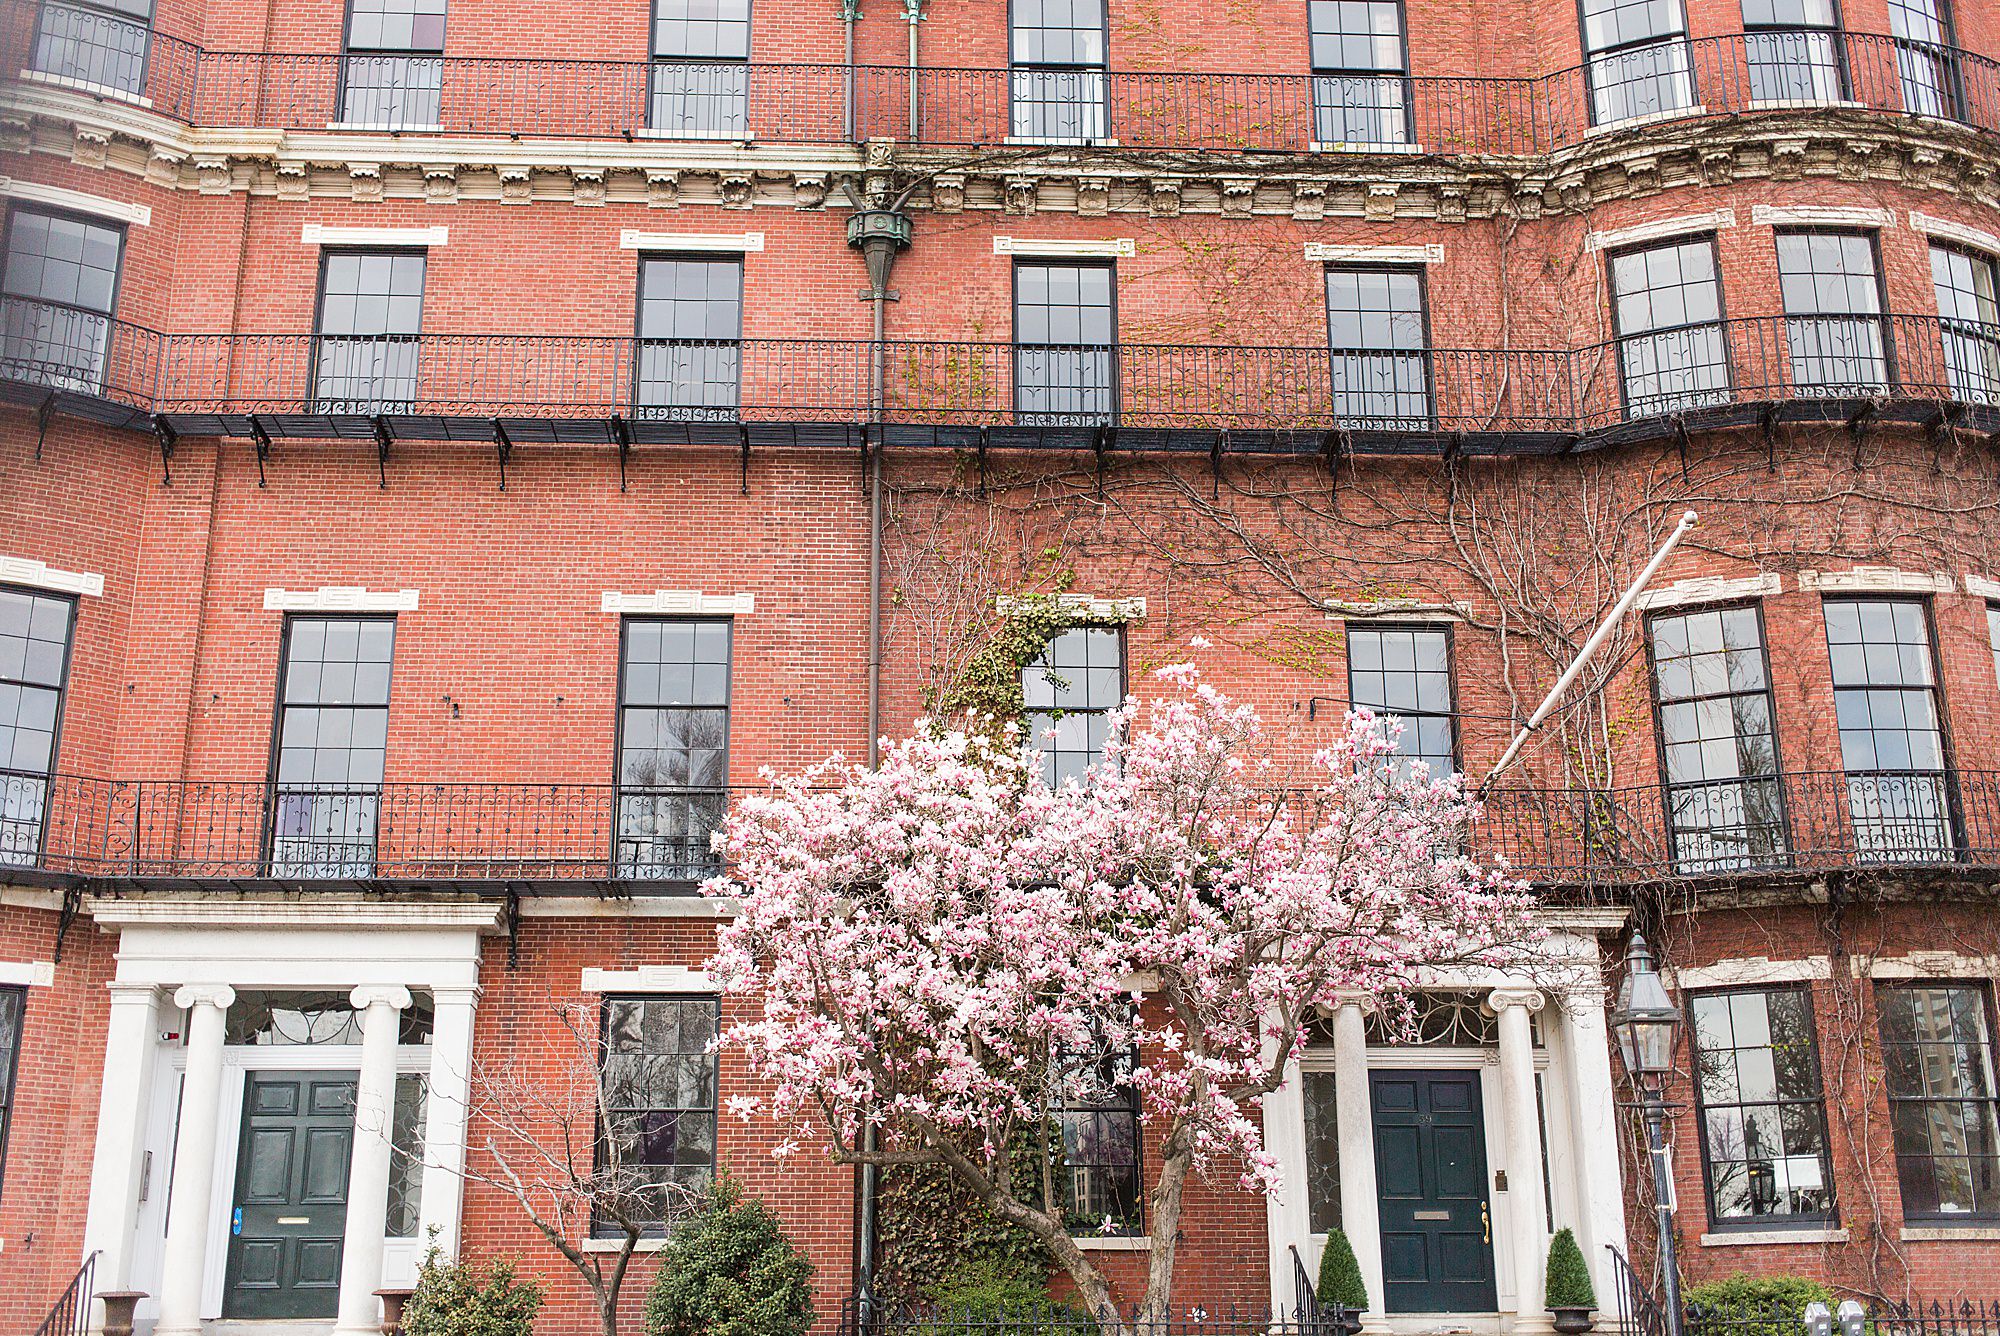 Boston Tree Blooms With Pink Flowers Against A Historic Red Brick Building